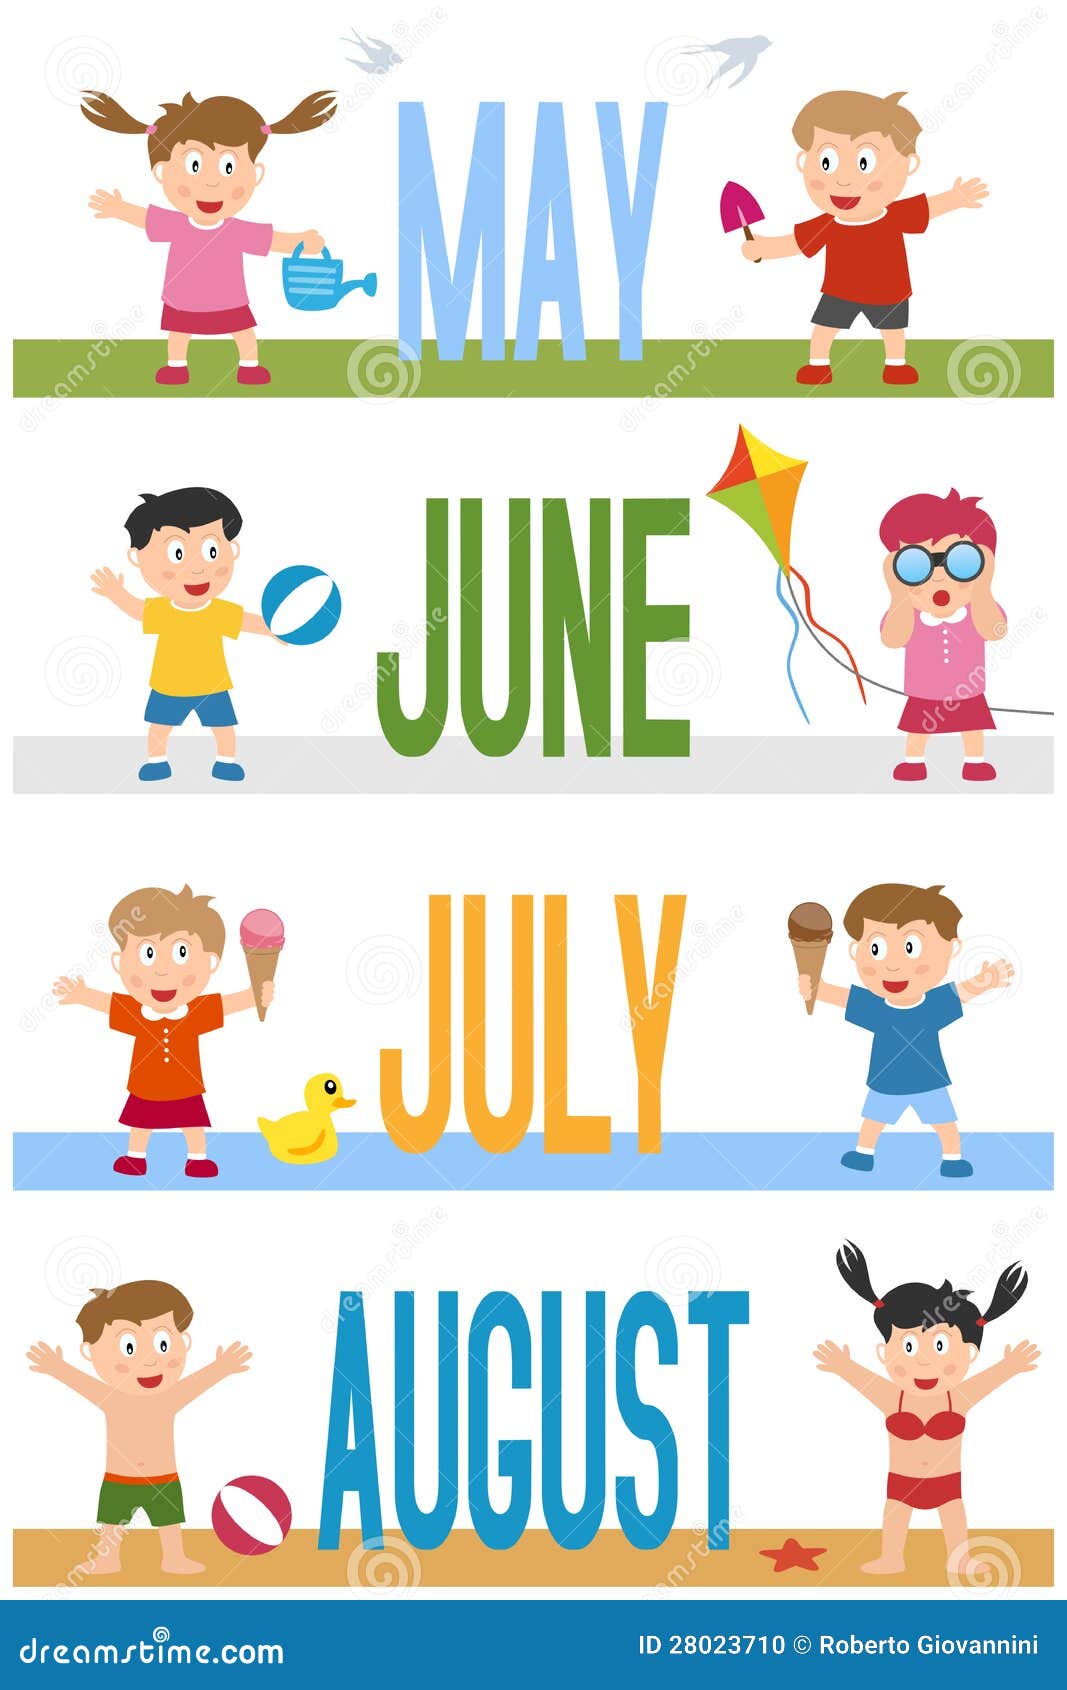 months banners with kids [2]